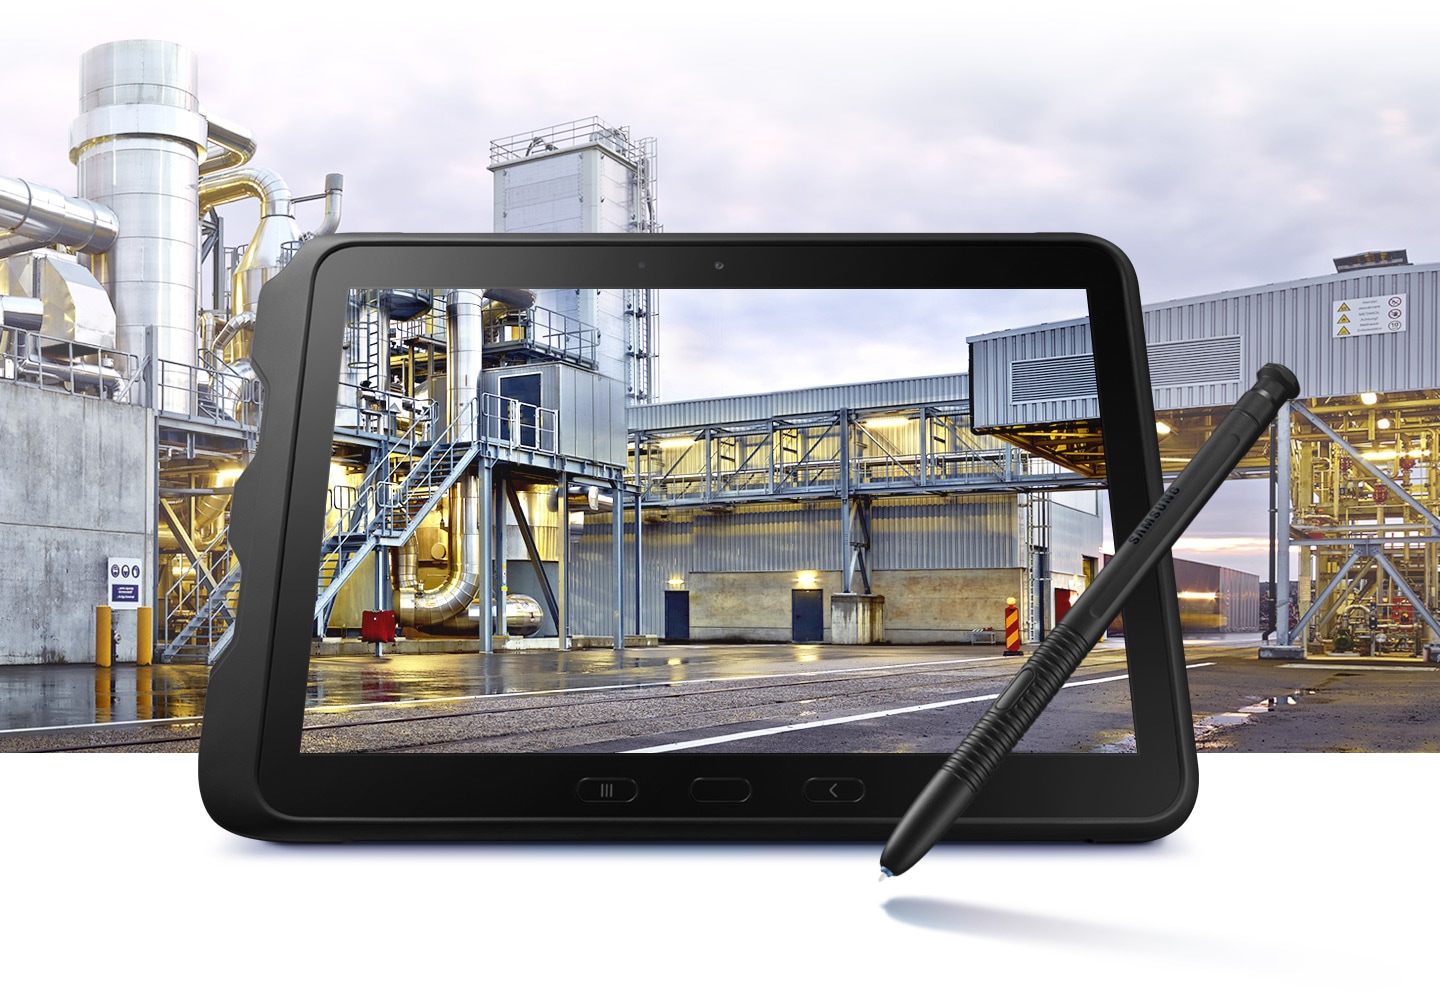 A Rugged tablet for business anywhere